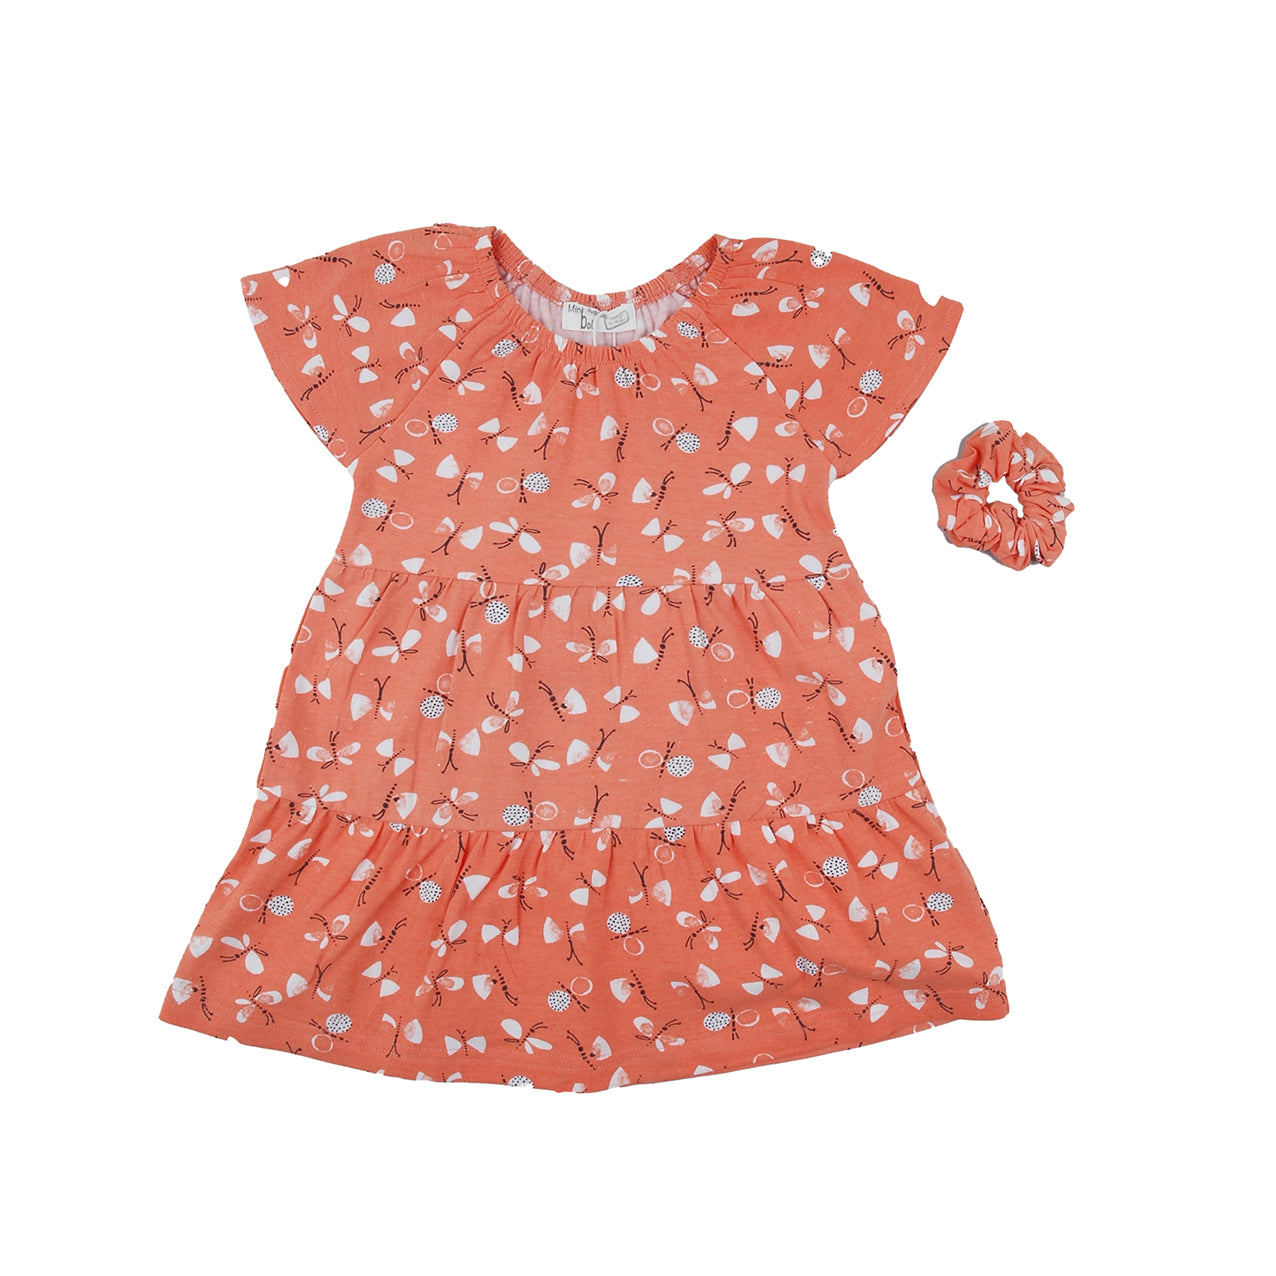 Orange Dress with butterfly print